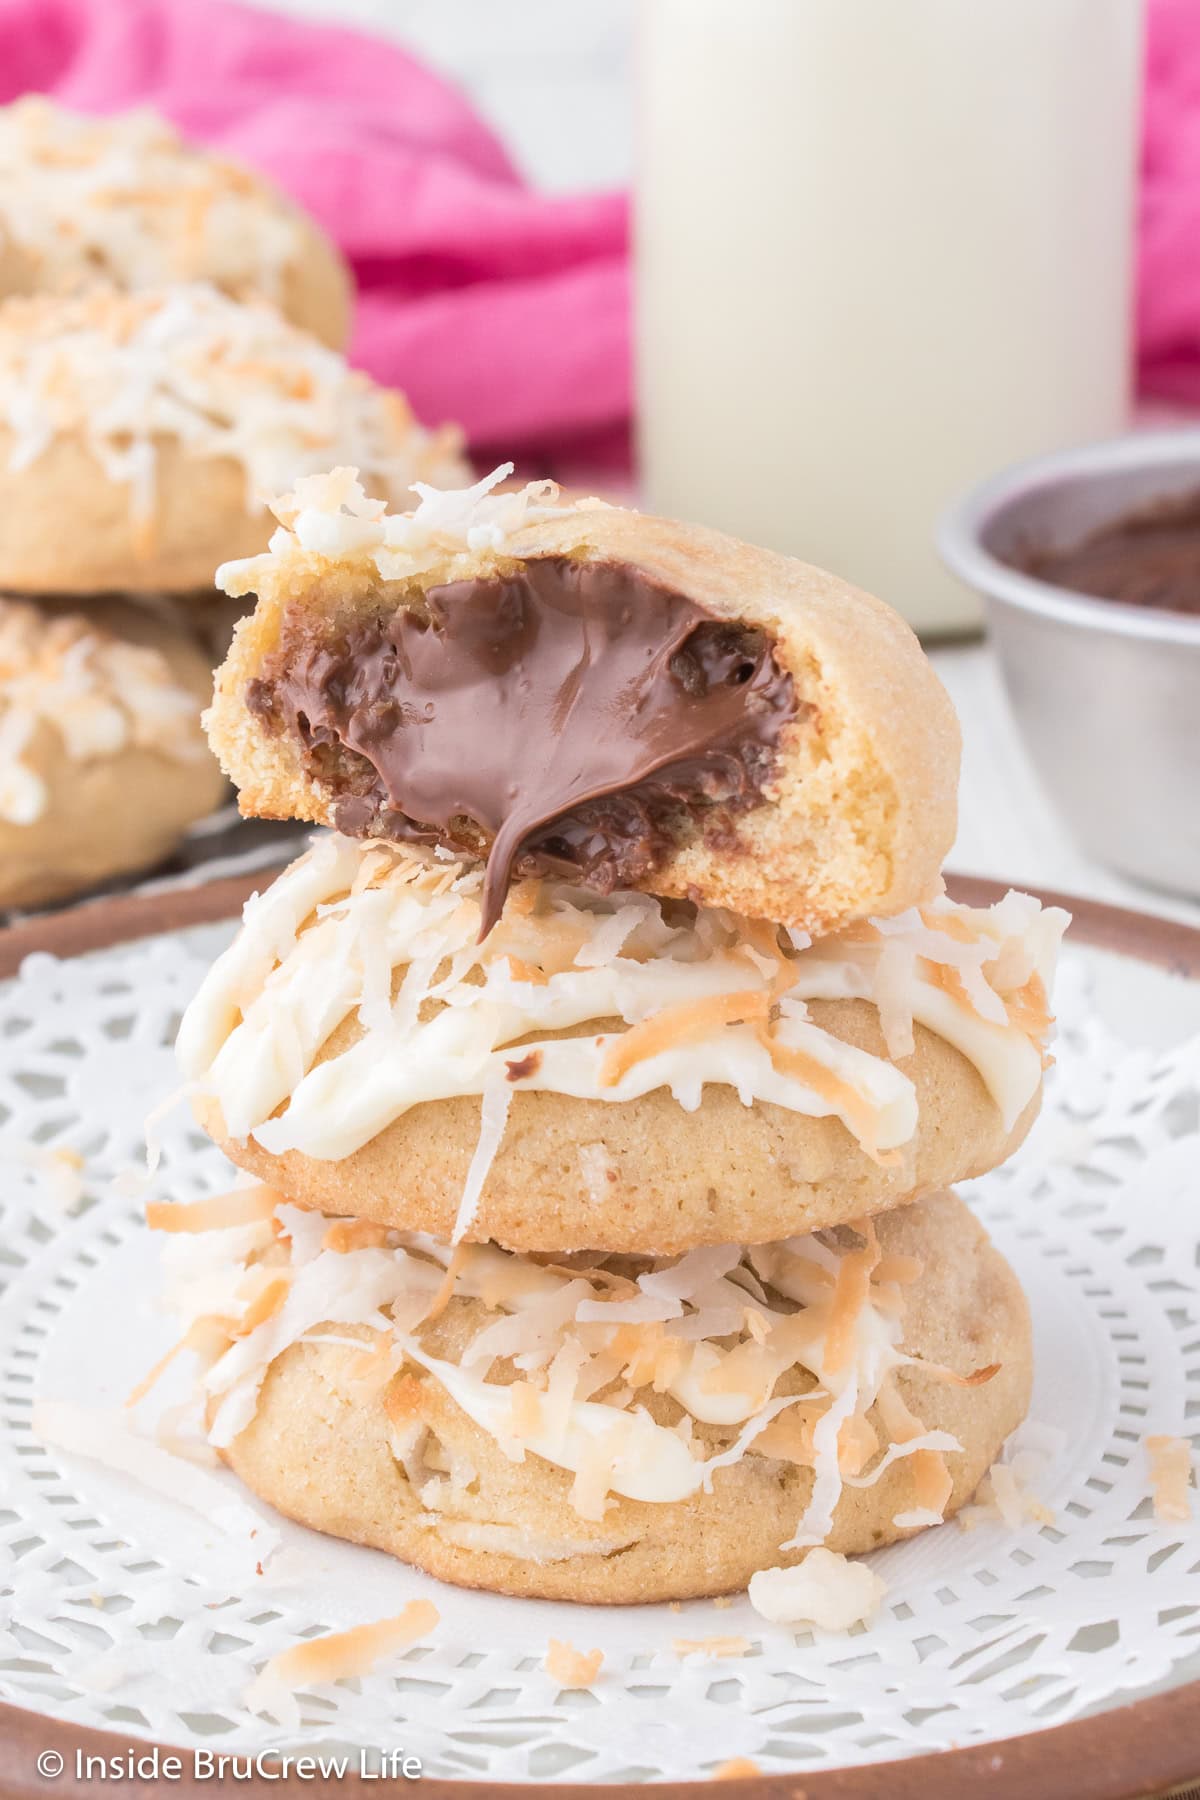 A stack of cookies stuffed with Nutella.